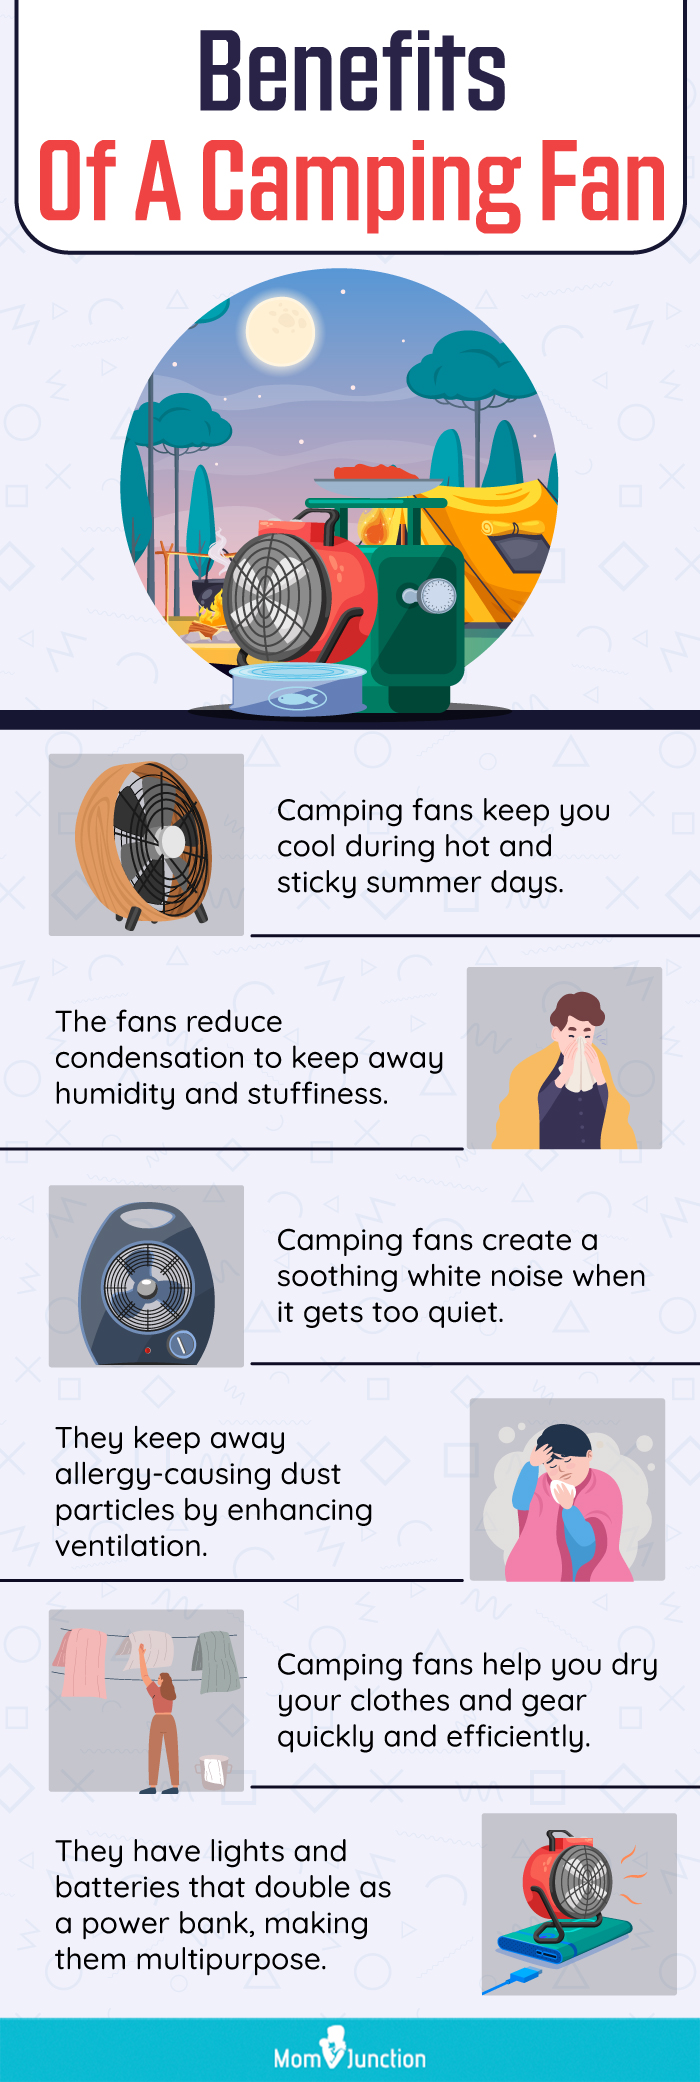 Benefits Of A Camping Fan (infographic)